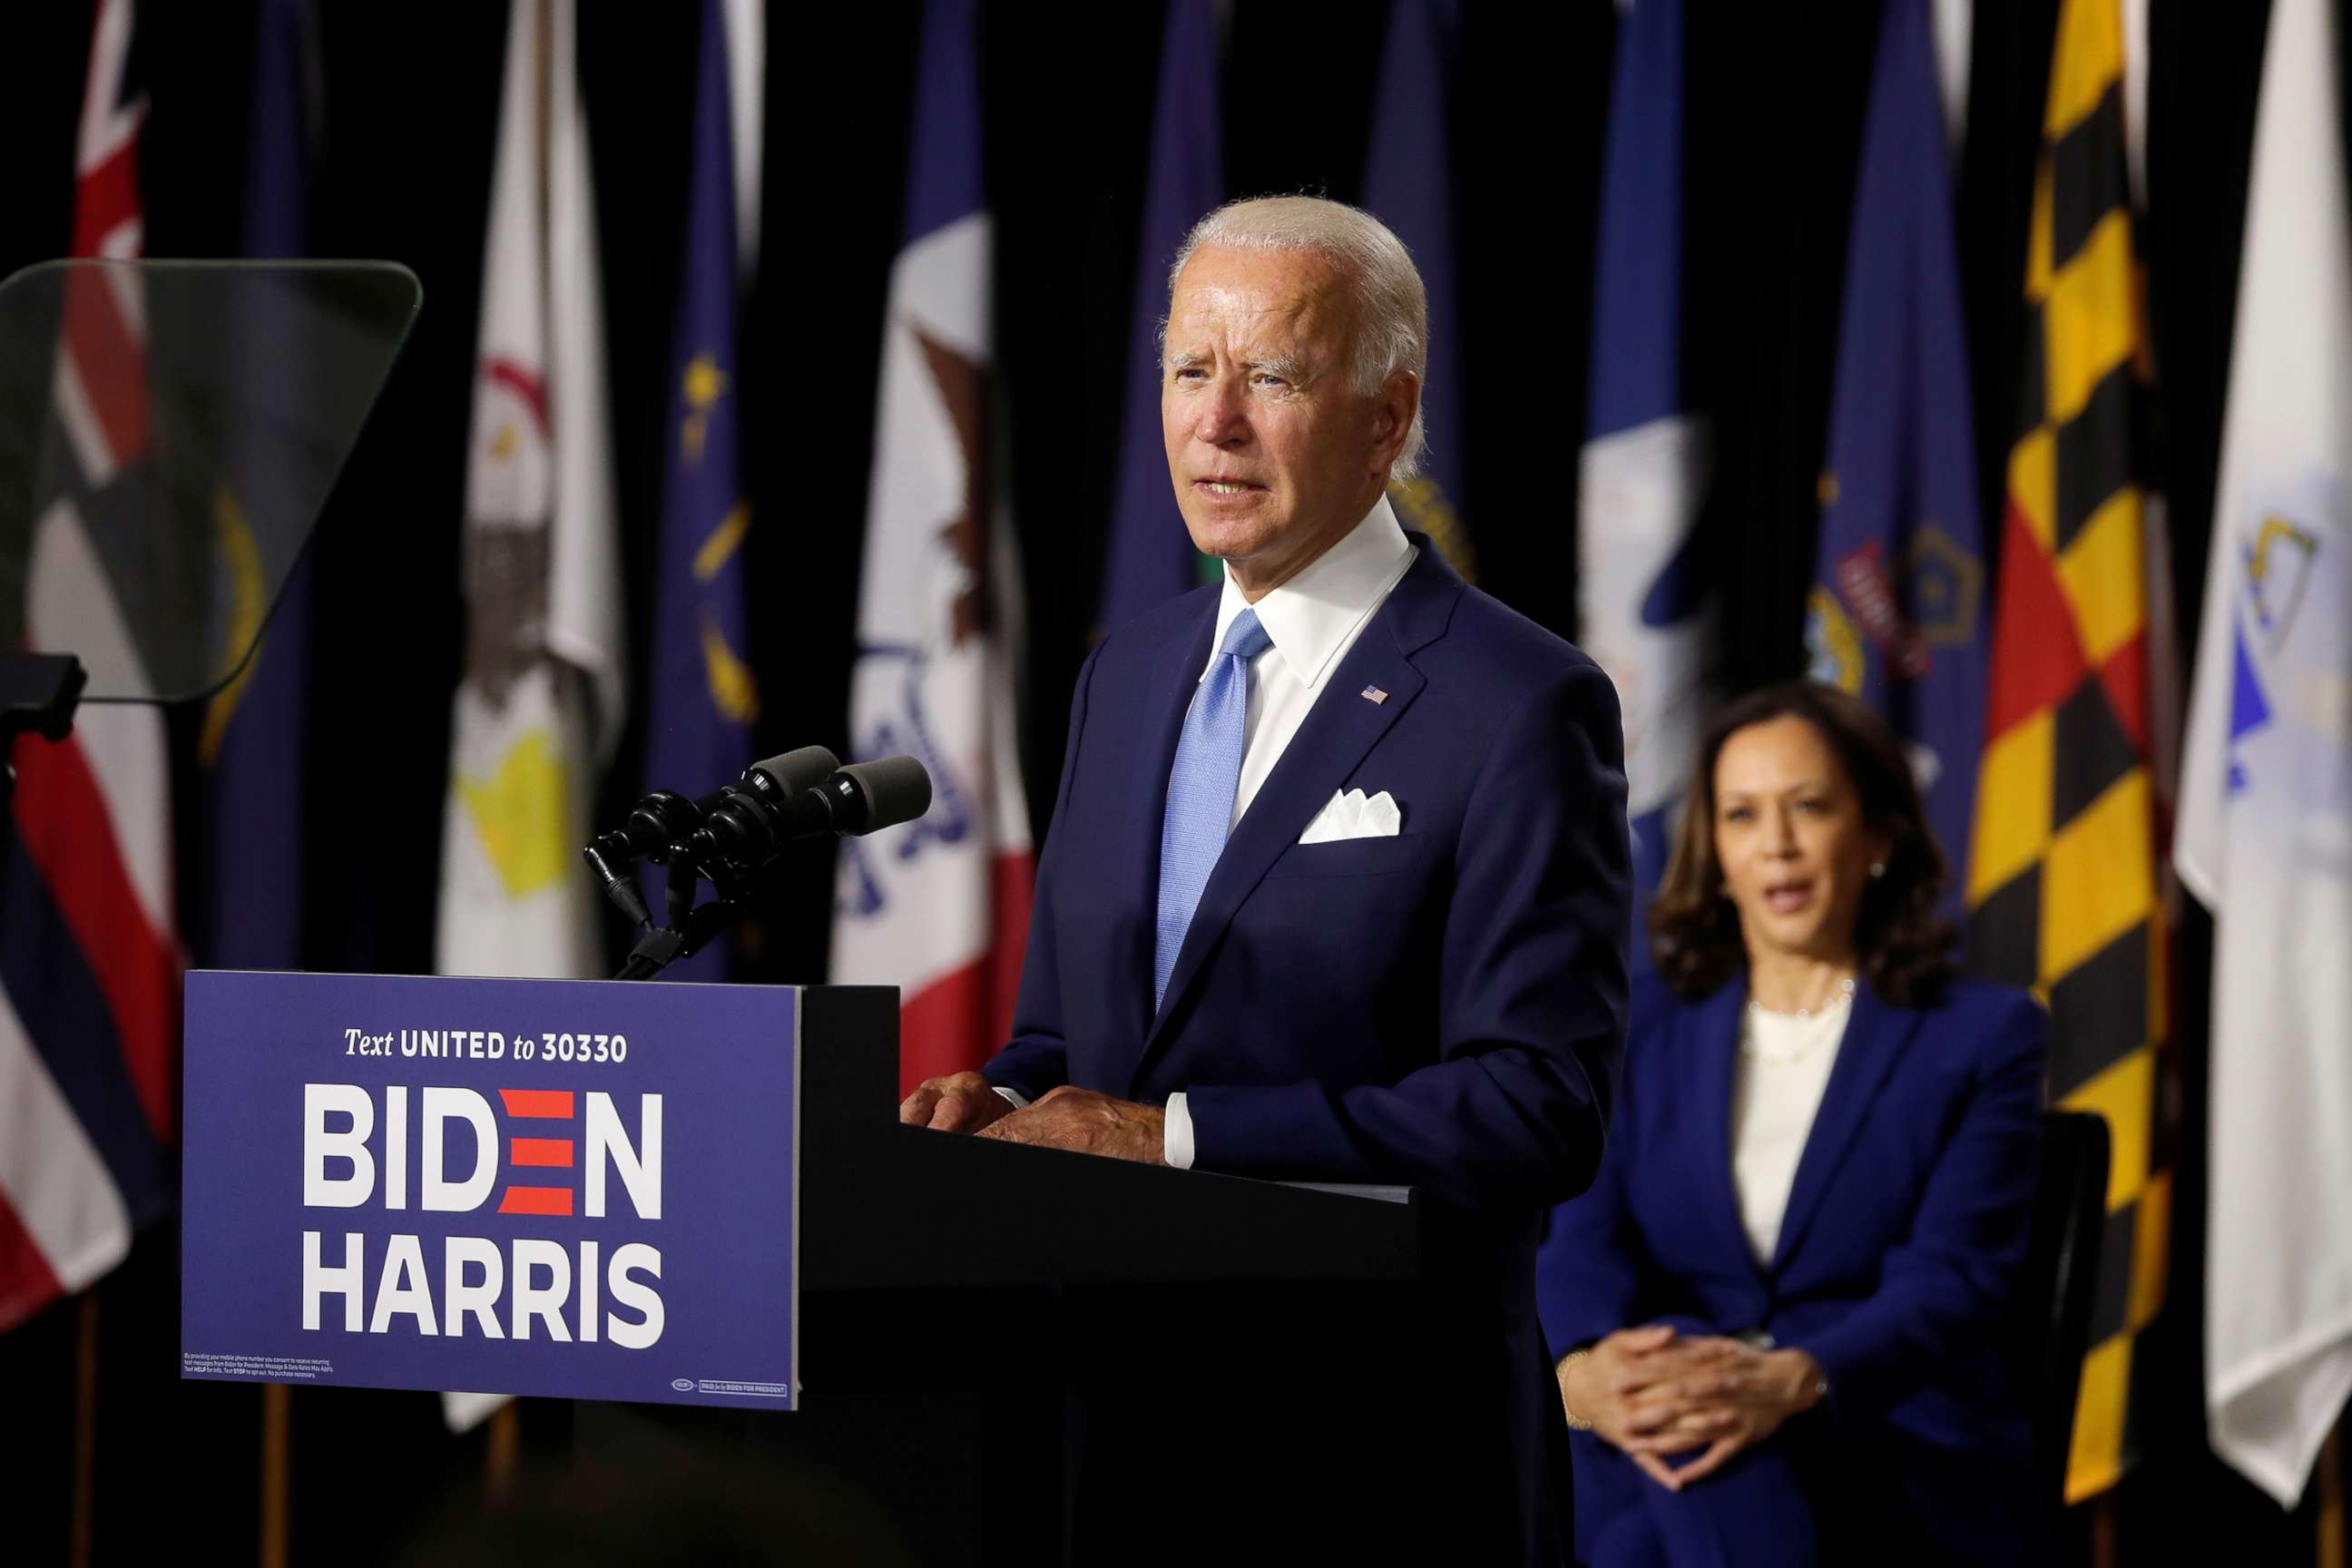 PHOTO: Democratic presidential candidate and former Vice President Joe Biden speaks at his first joint appearance with his running mate Senator Kamala Harris, at Alexis Dupont High School in Wilmington, Del., Aug. 12, 2020.